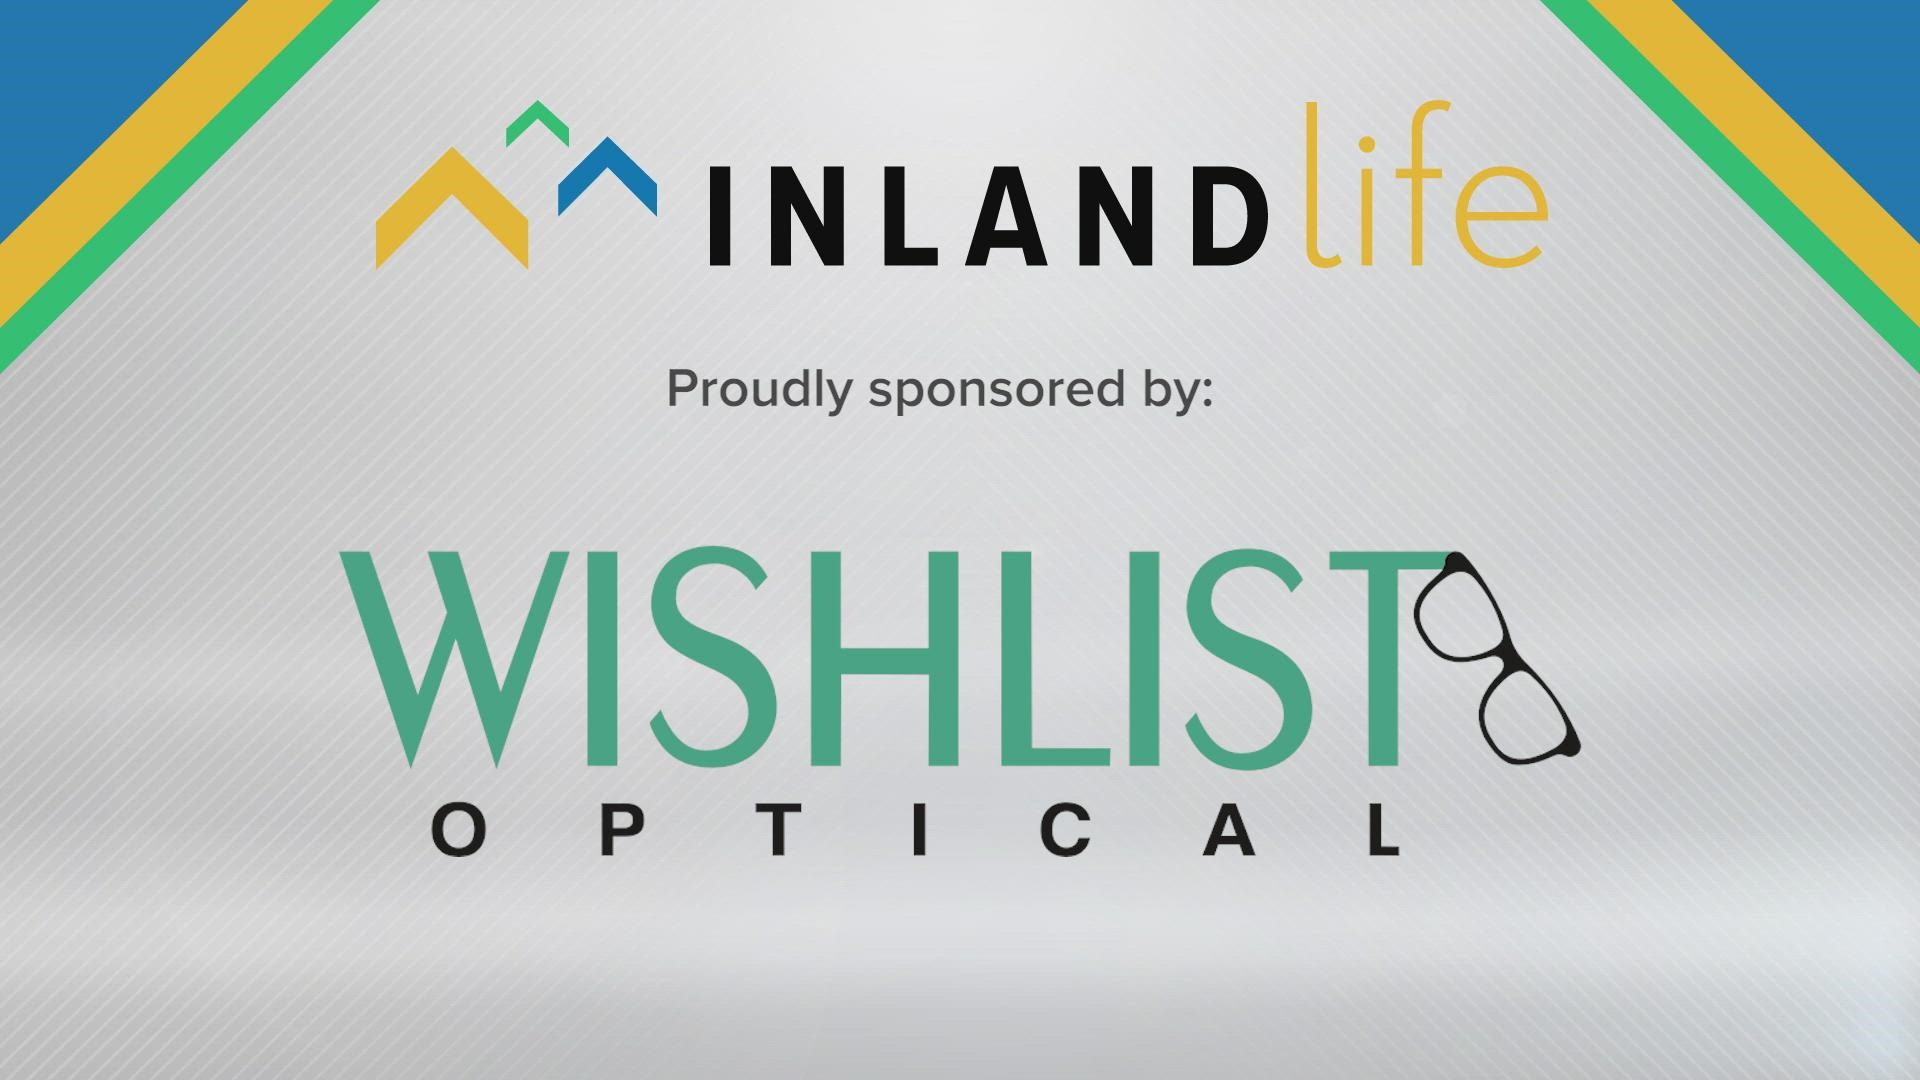 Wish it, want it, wear it! Wishlist Optical will make your eyewear wishes come true with unique designs at affordable prices.